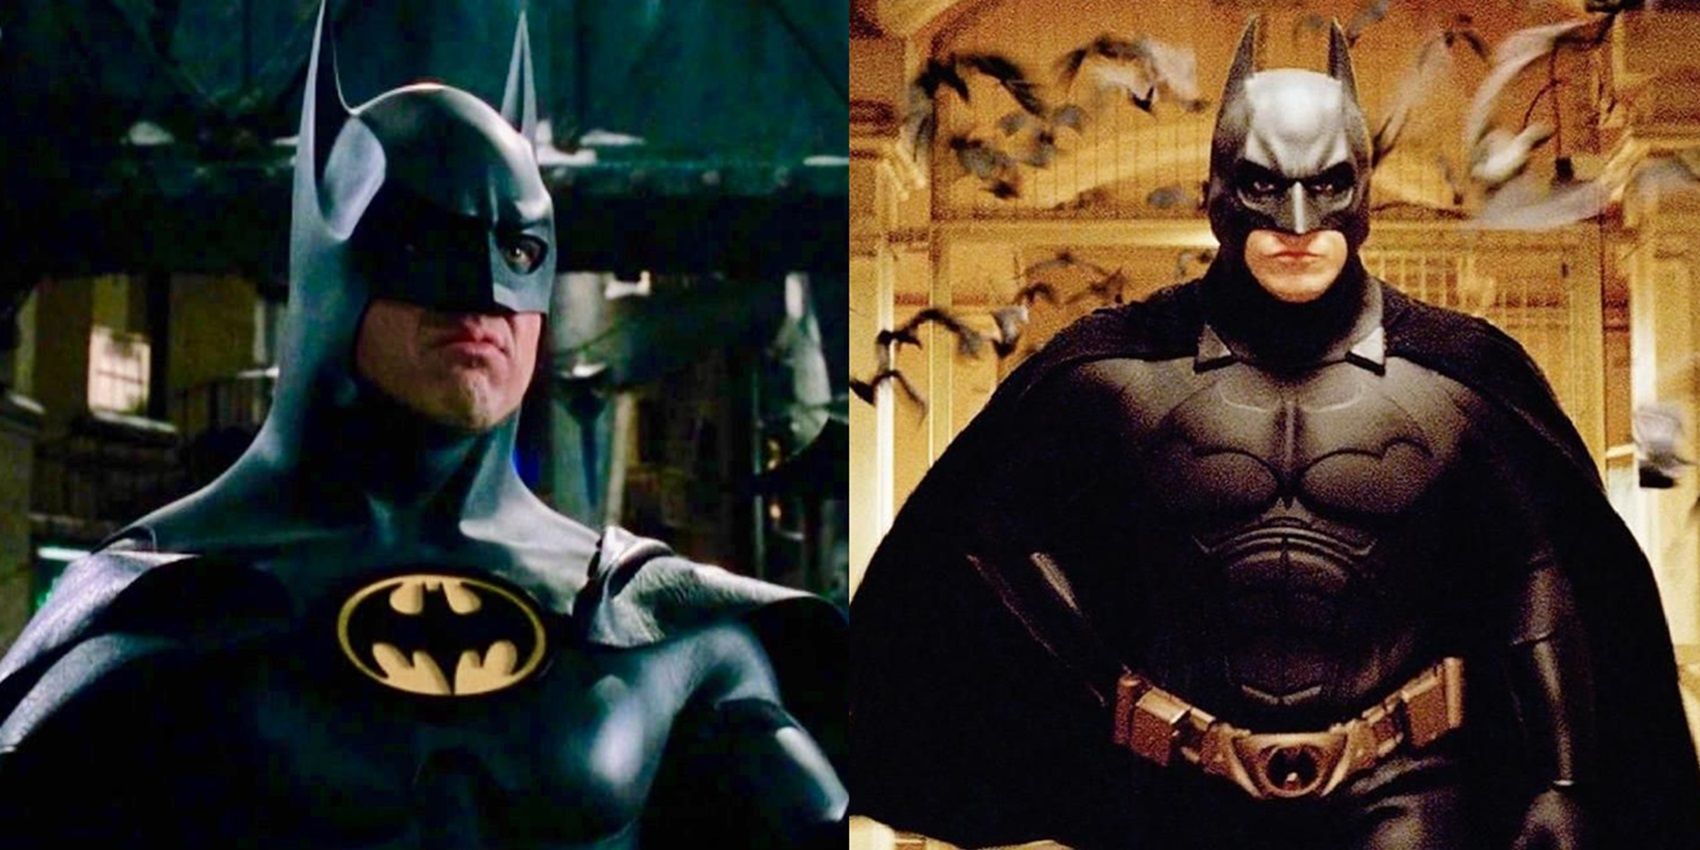 Batman The 5 Best Action Sequences From Michael Keatons Movies (& 5 From Christian Bales)